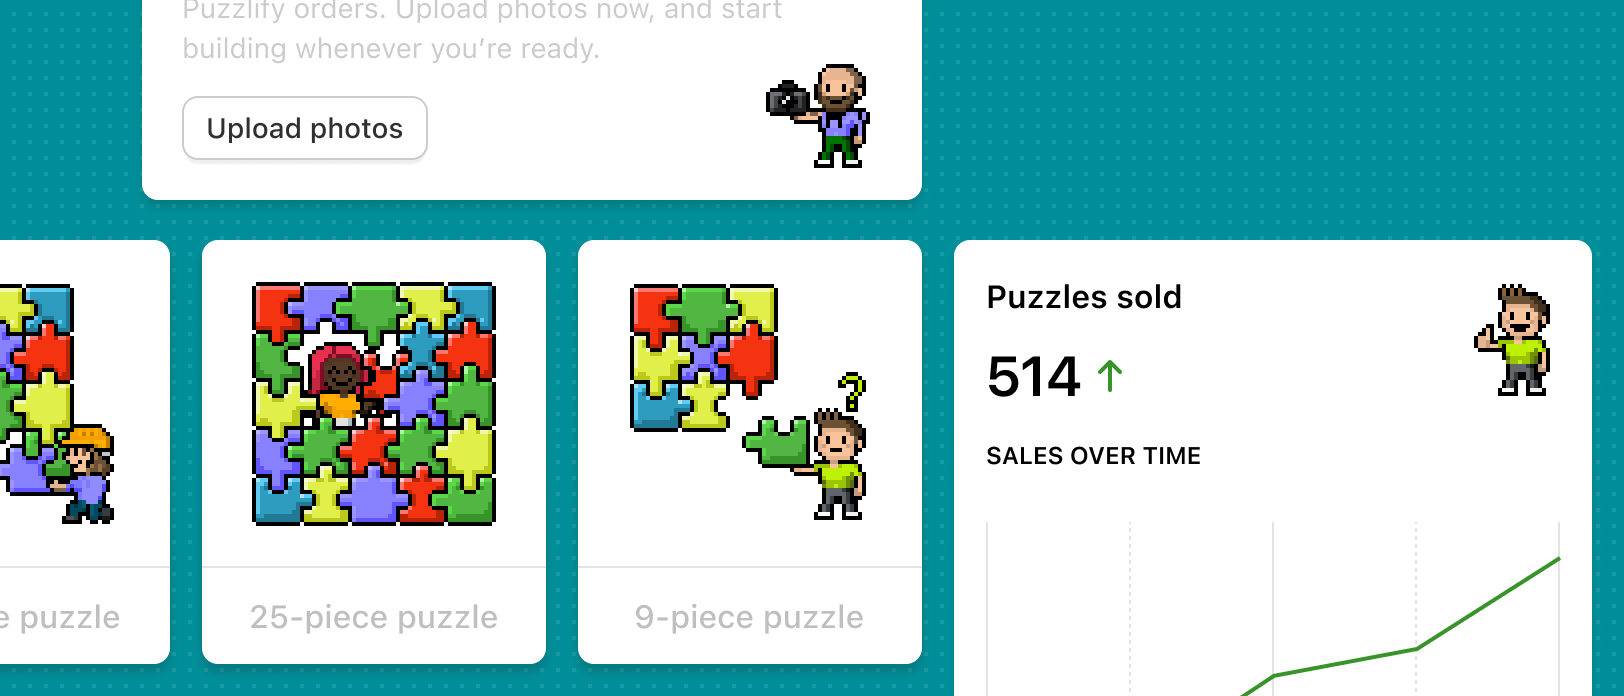 Illustrations being used in the Puzzlify app interface.